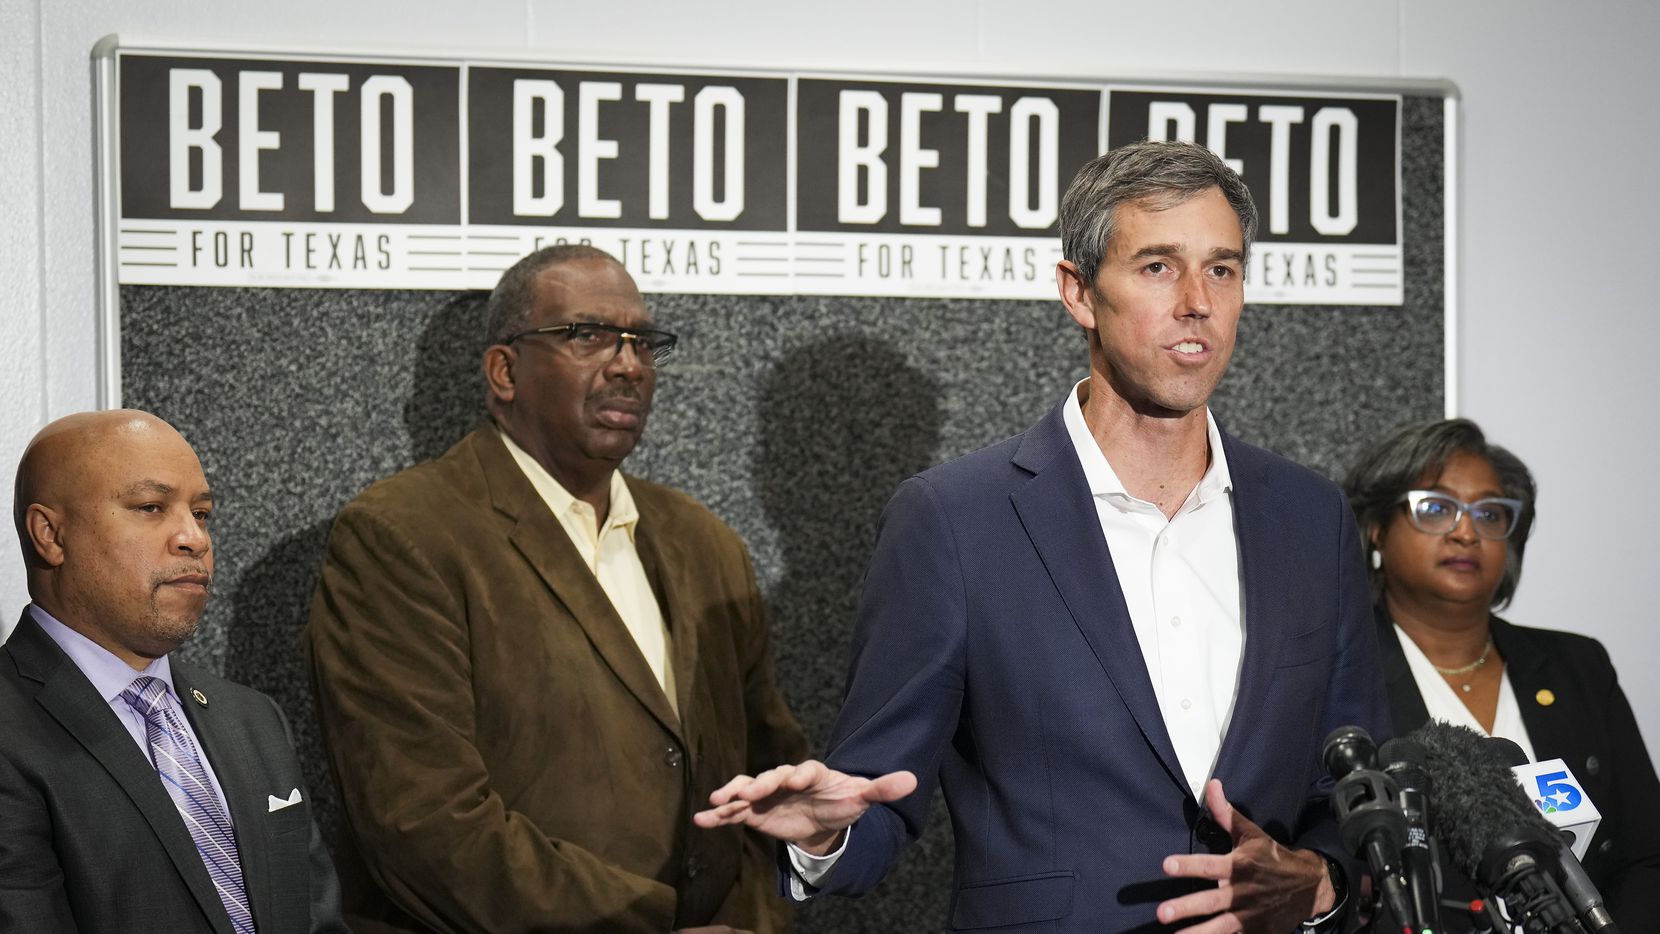 Democratic candidate for governor Beto O'Rourke is flanked by (from left) State Rep. Carl Sherman, State Sen. Royce West and State Rep. Rhetta Bowers as he addresses a press conference after meeting with Black elected leaders at Paul Quinn College on Monday, Feb. 7, 2022, in Dallas.(Smiley N. Pool / Staff Photographer)